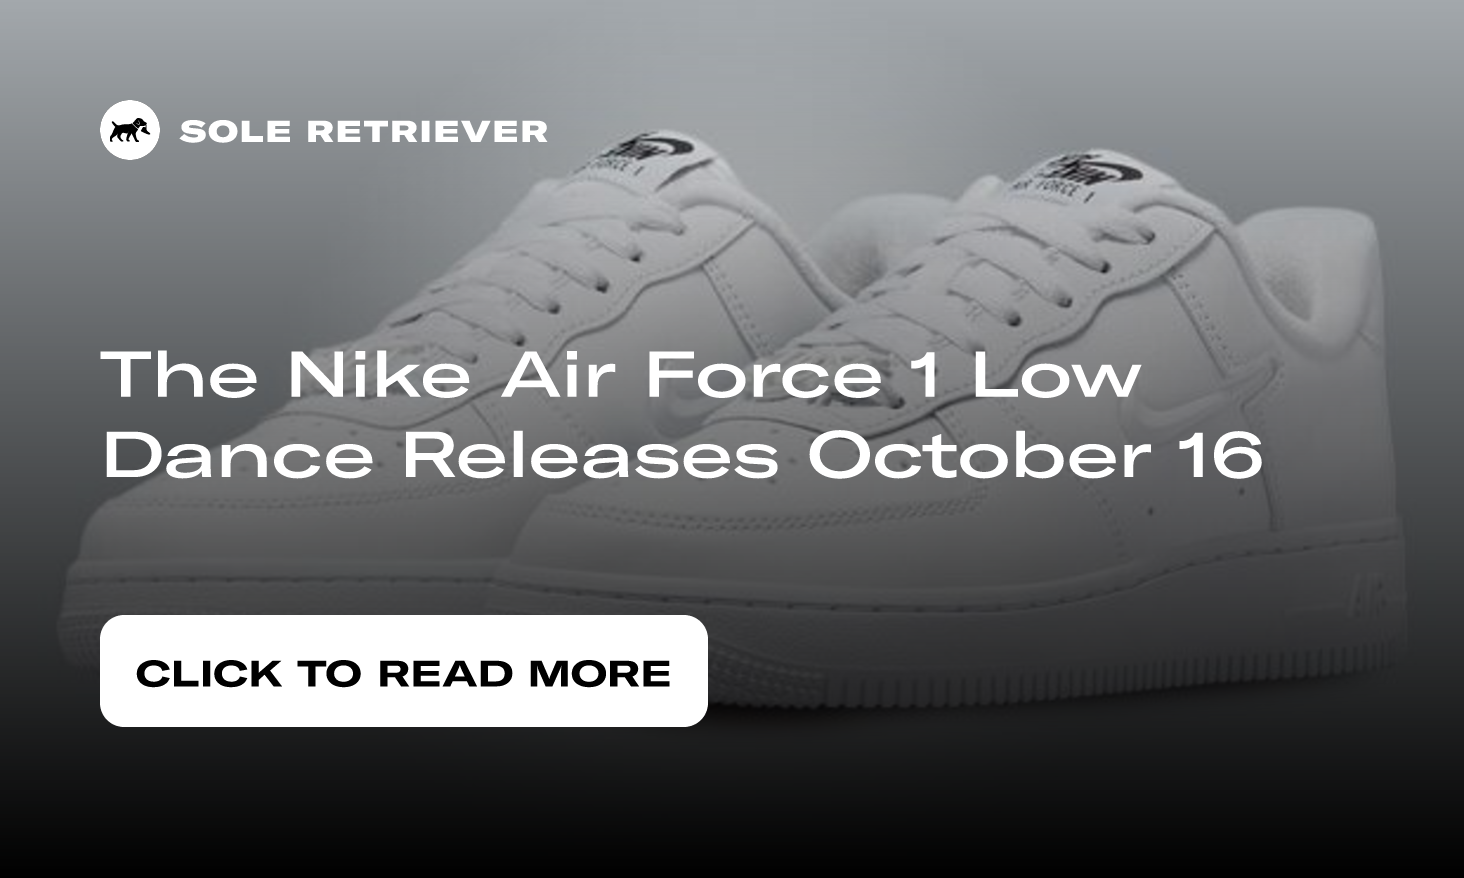 The Supreme x Nike Air Force 1 Baroque Brown Releases November 2023 -  Sneaker News